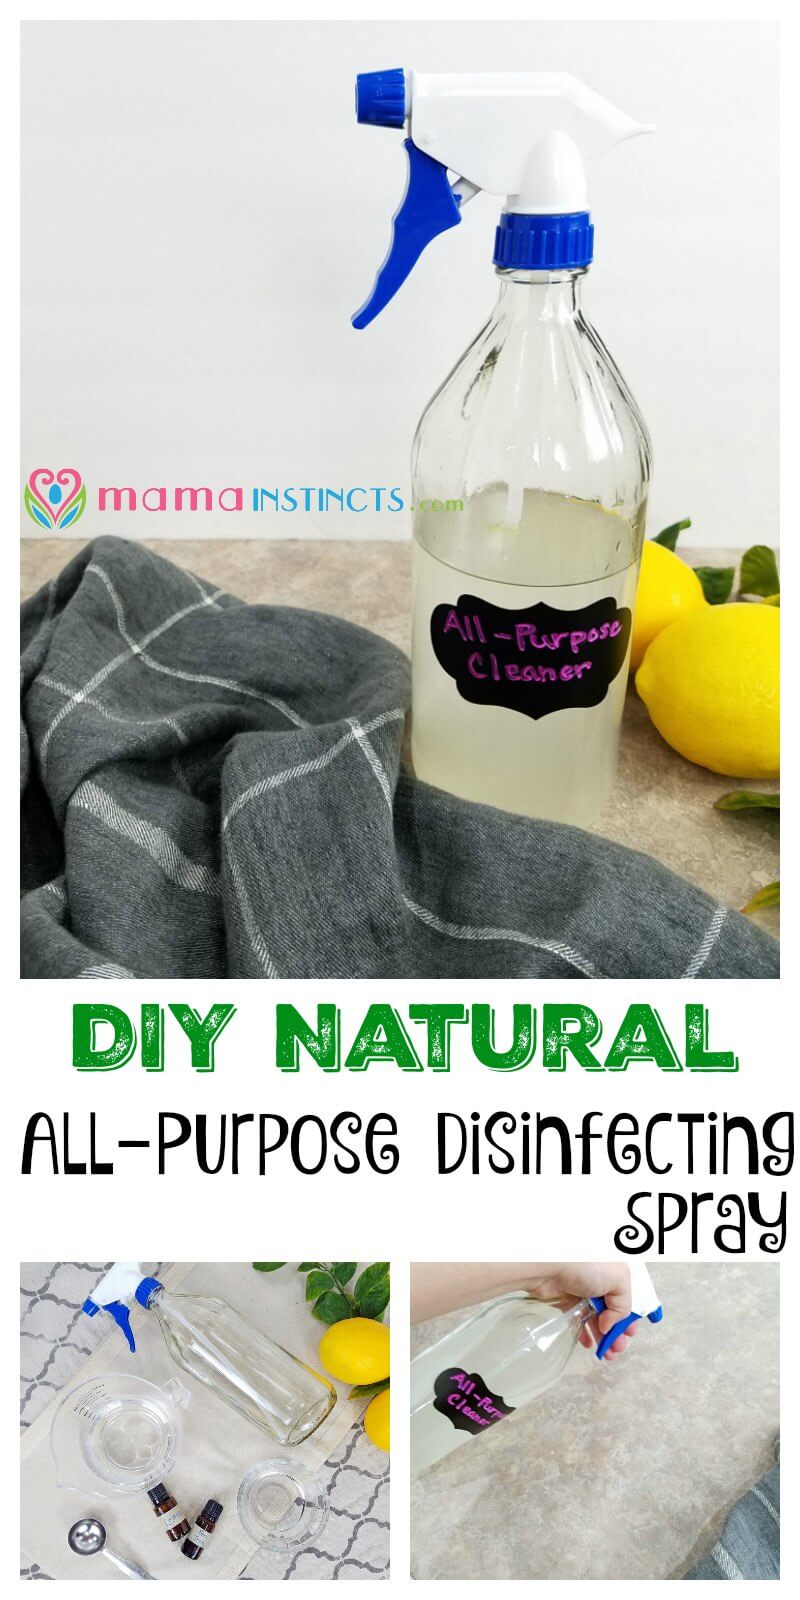 Try this DIY all purpose cleaner that is all natural, non-toxic and safe to use around kids. Perfect for cleaning kitchens and bathrooms.